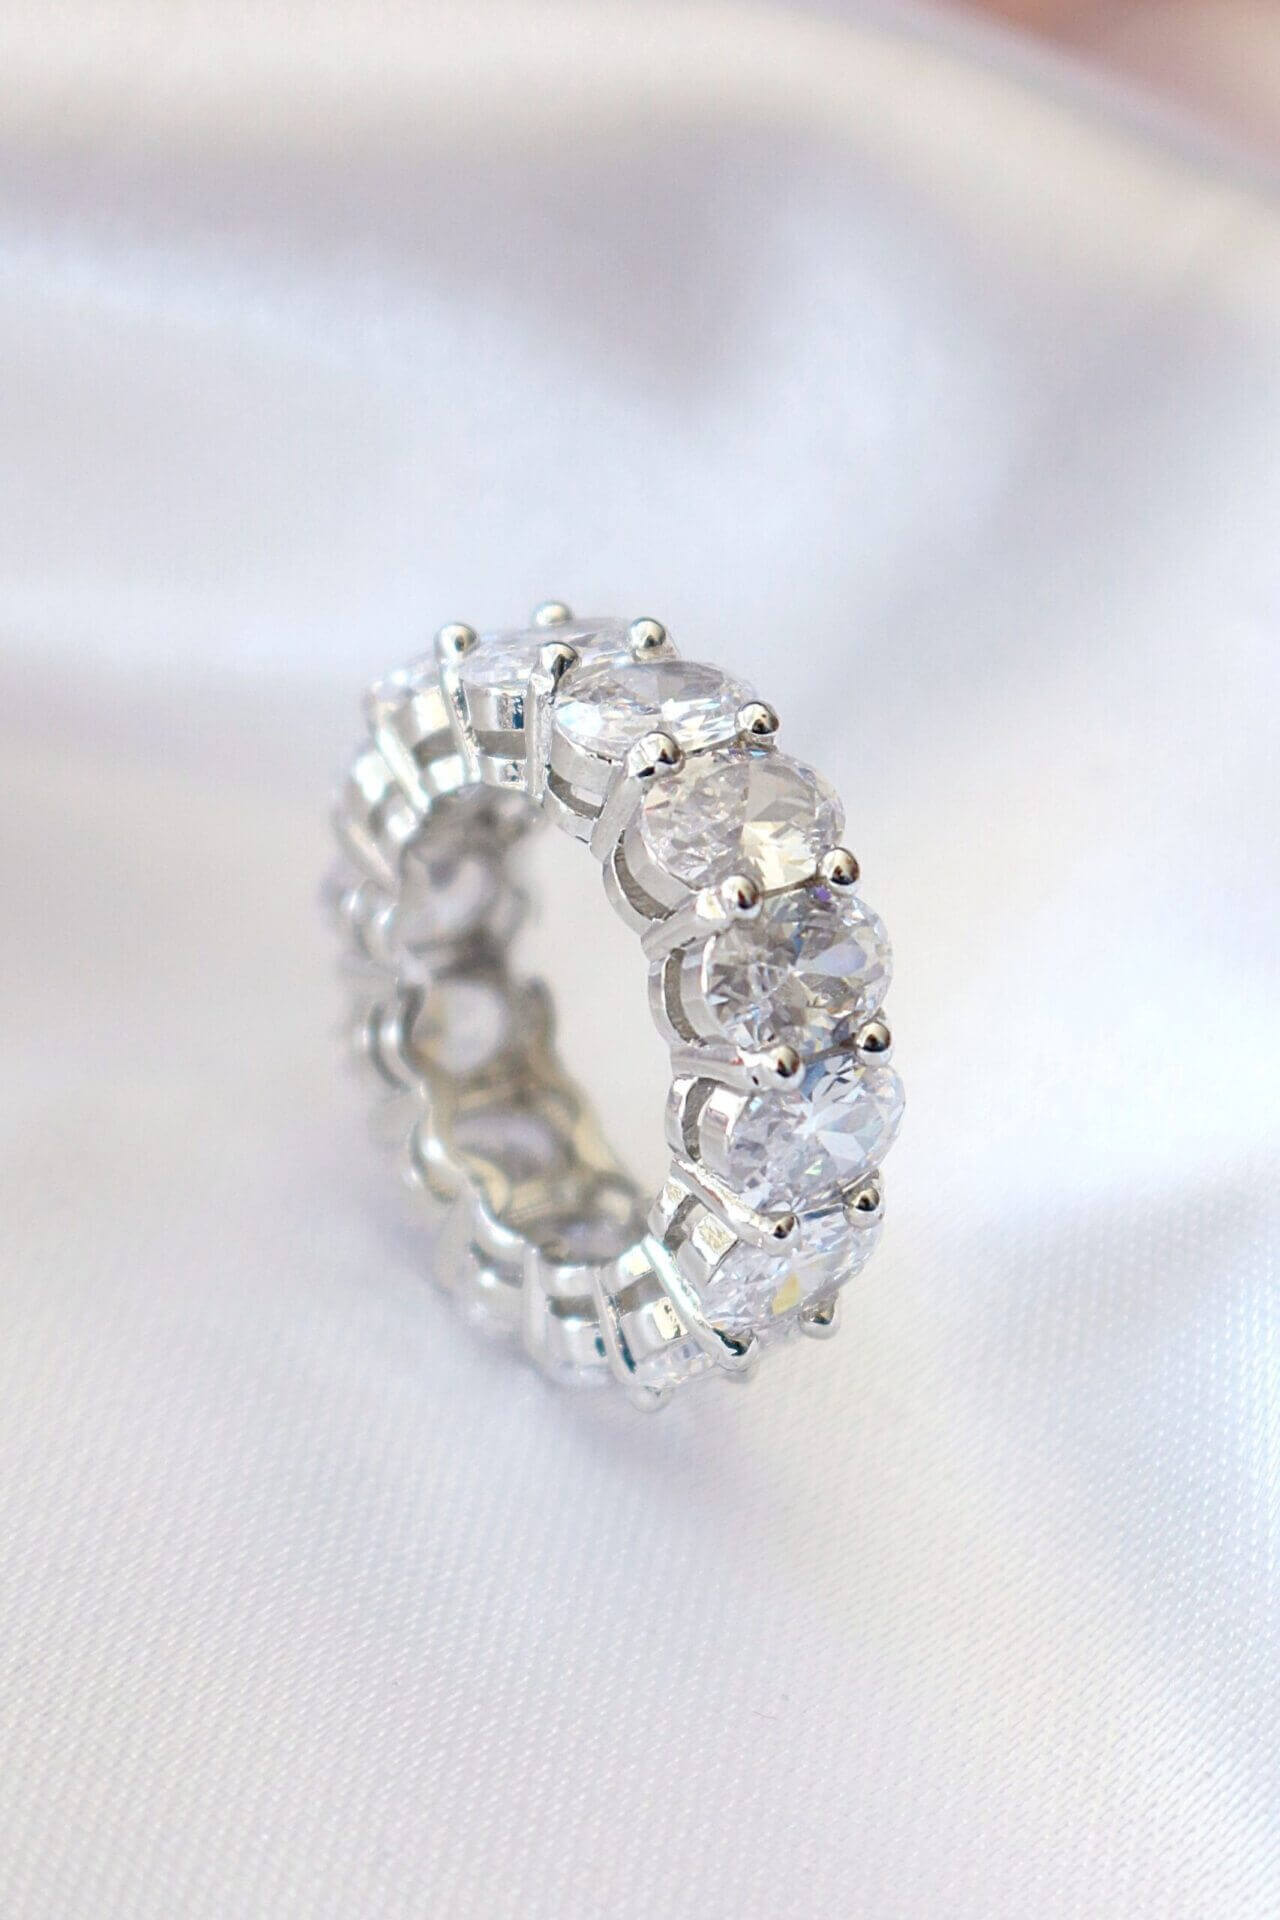 Stamped 925 Silver Eternity Ring 20 S7